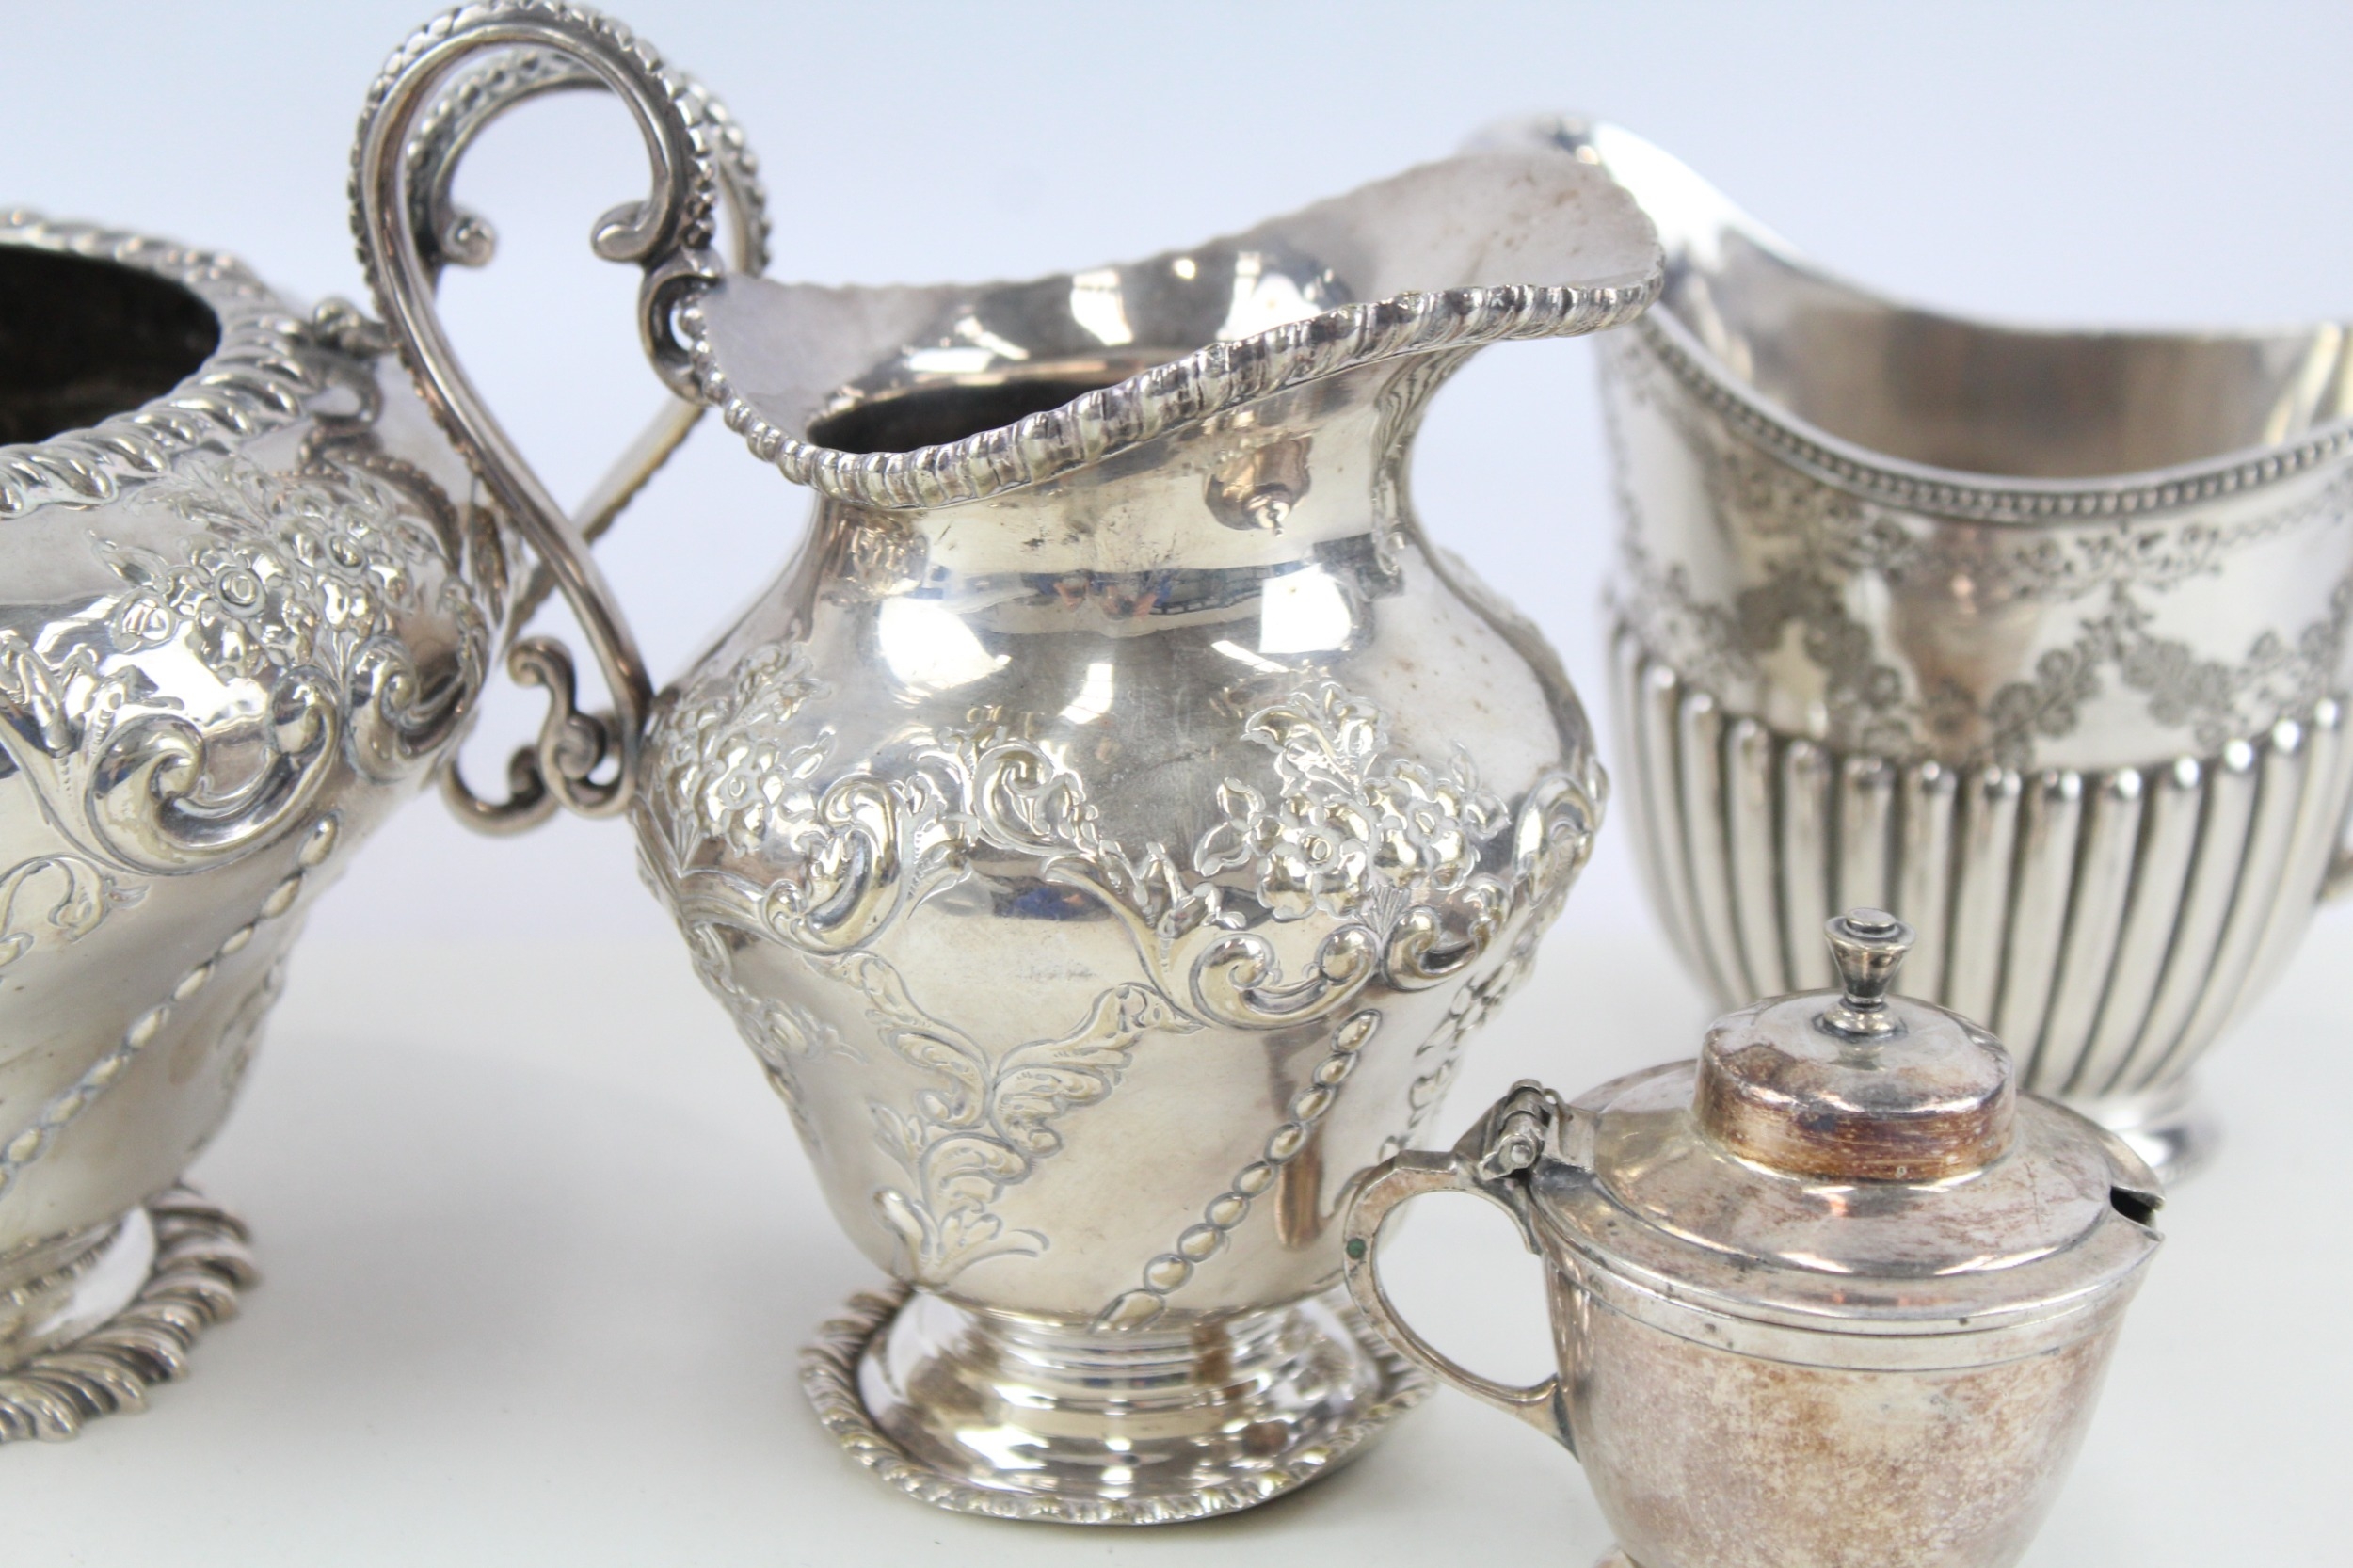 Silver Plate Ware Antique Vintage Victorian Creamer Teapot George III x 5 2164g - Image 4 of 6